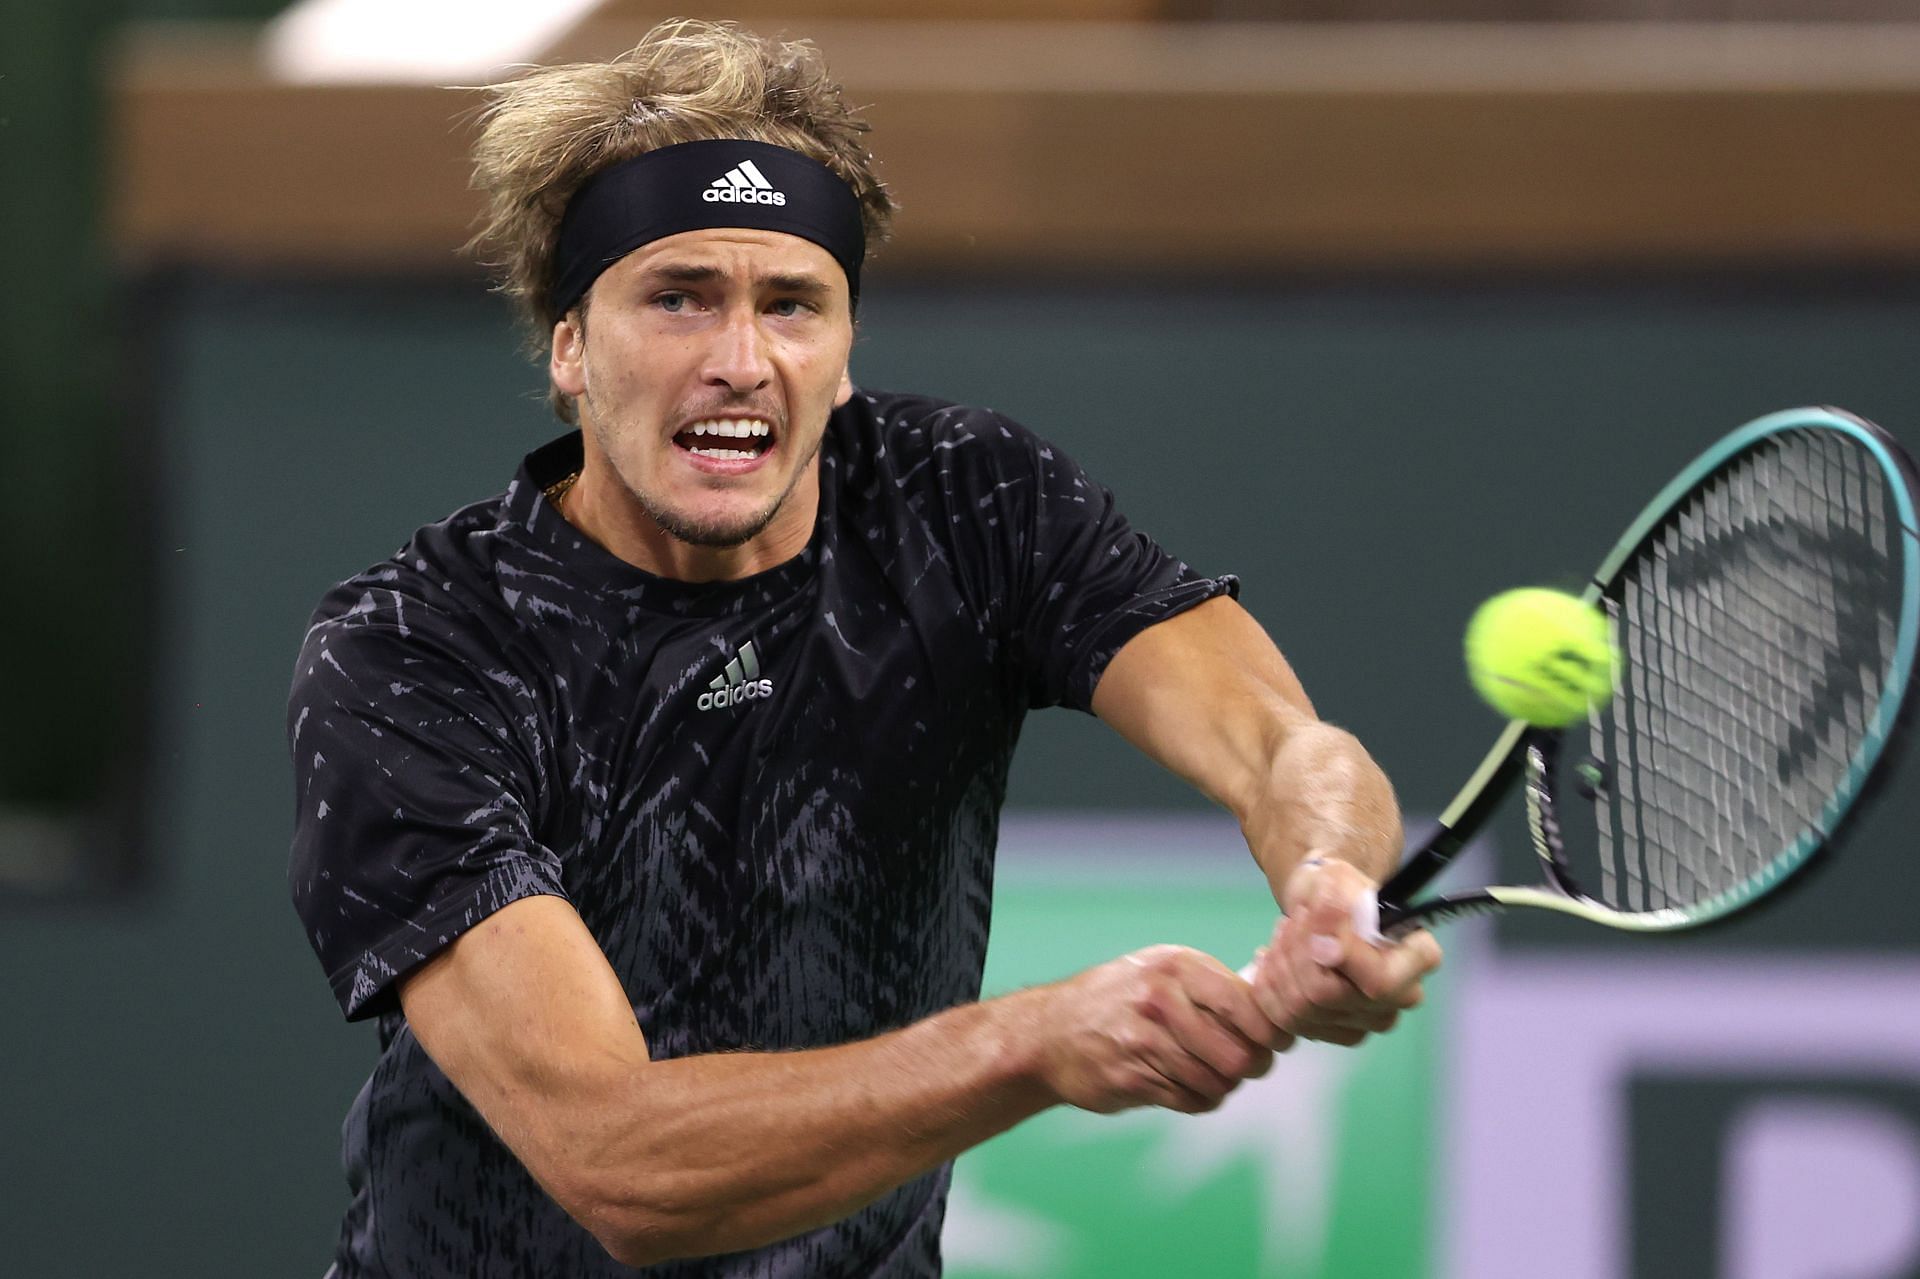 Alexander Zverev at the 2021 Indian Wells Masters